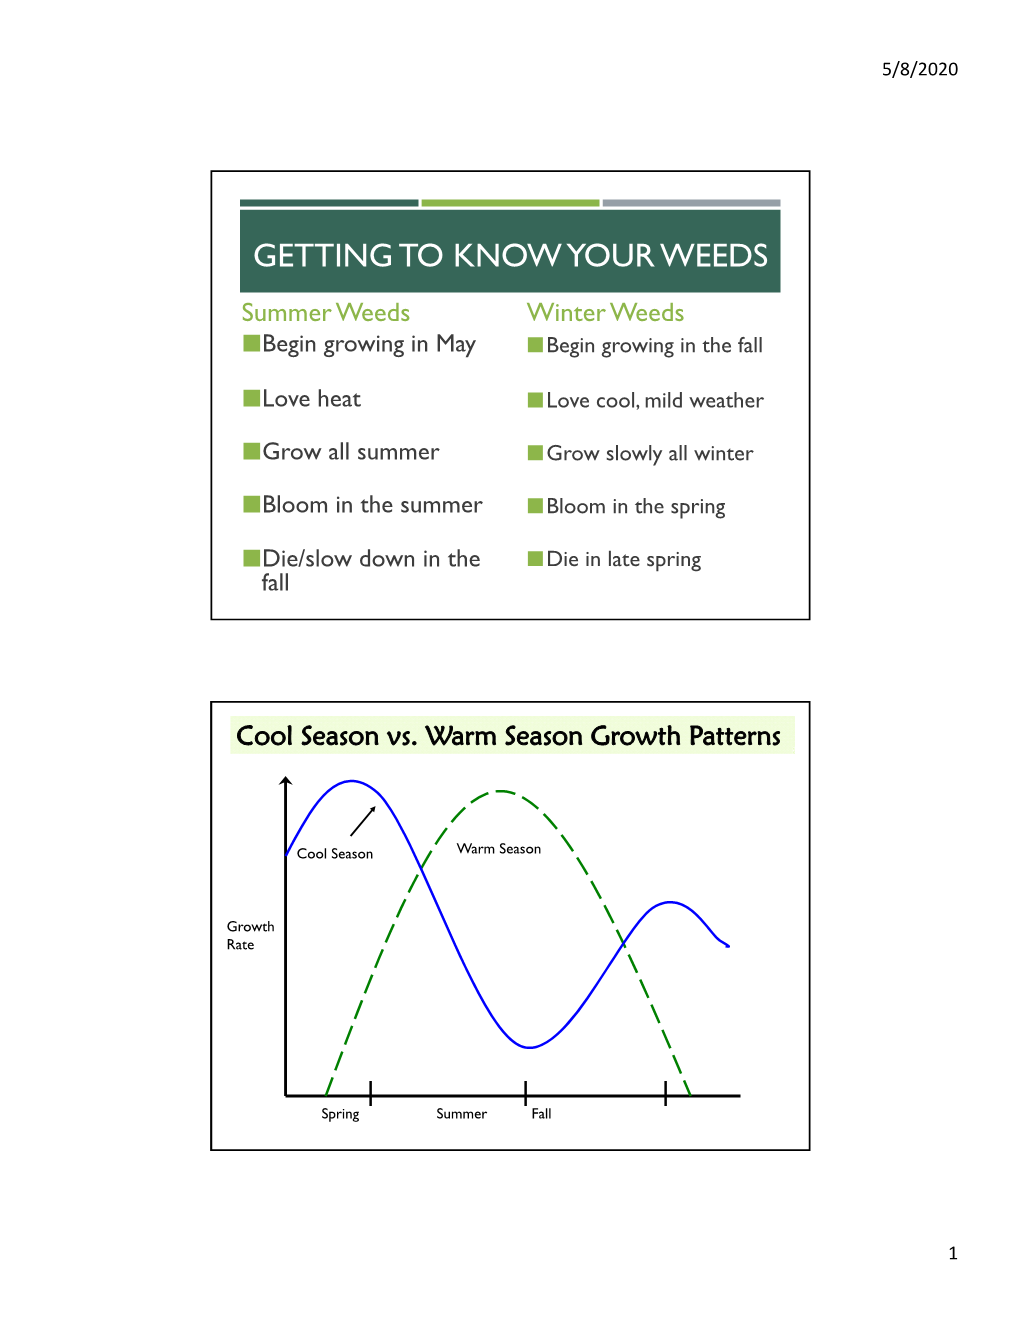 GETTING to KNOW YOUR WEEDS Summer Weeds Winter Weeds Begin Growing in May Begin Growing in the Fall